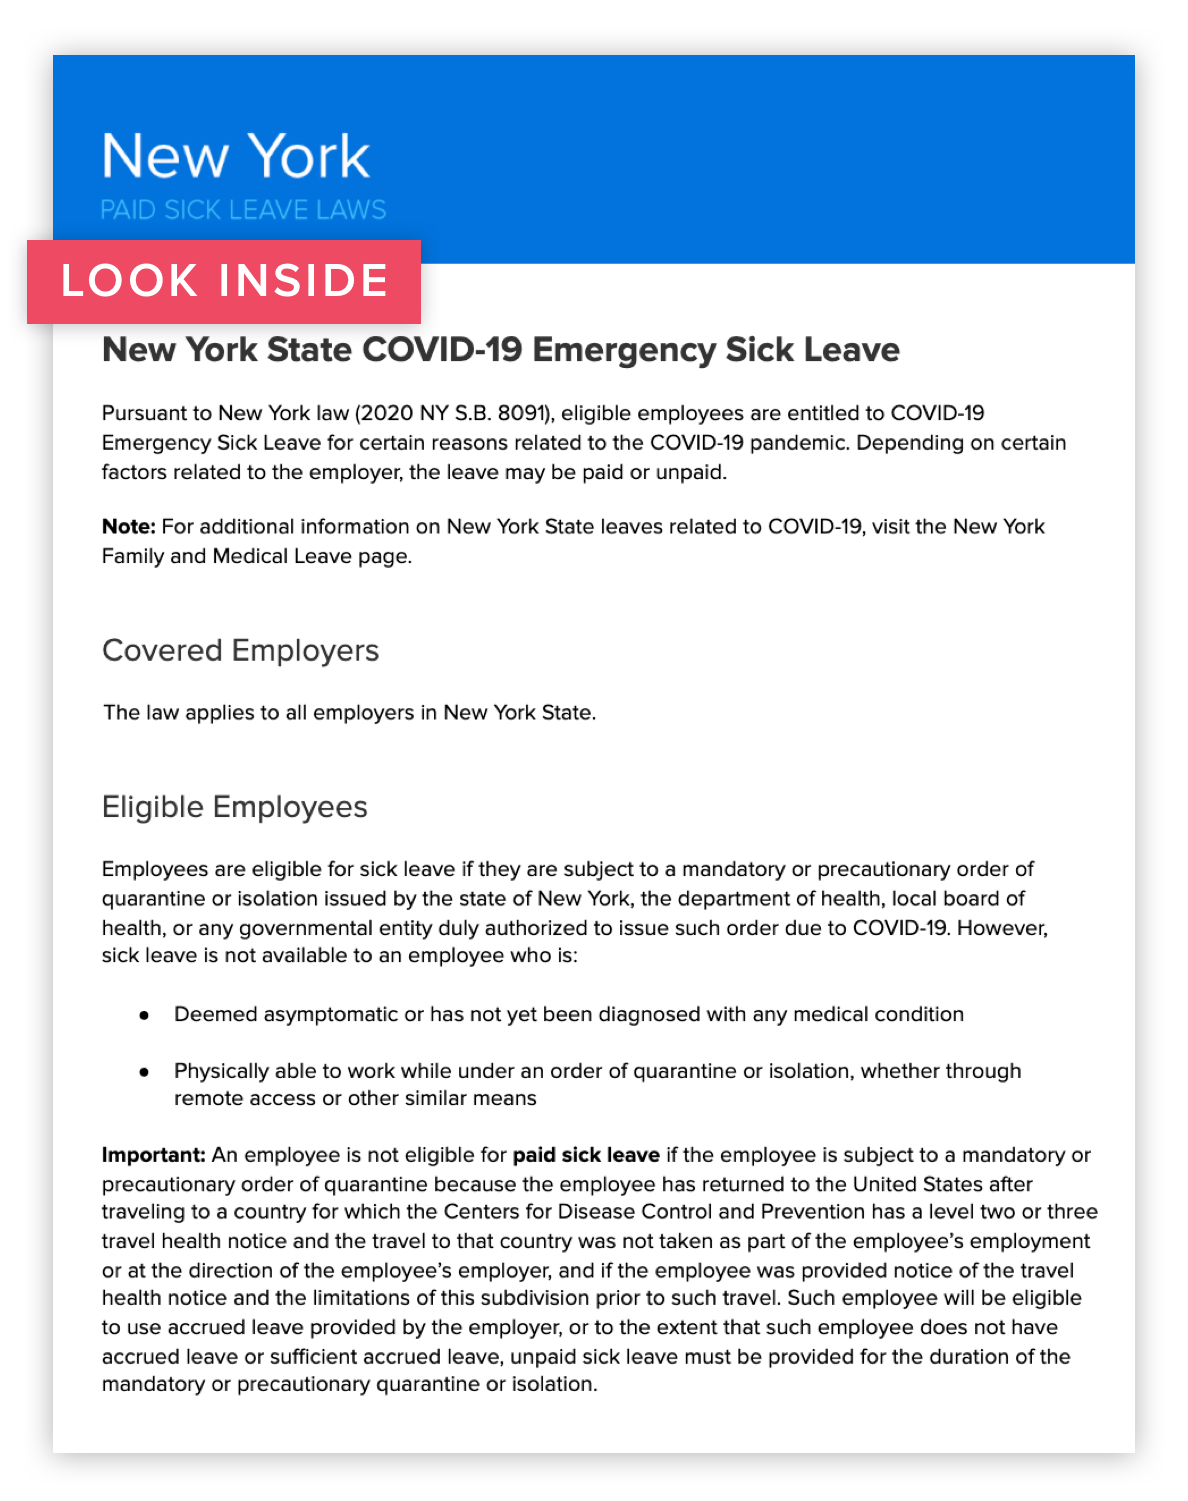 HR’s Guide to New York State’s Paid Sick Leave Laws